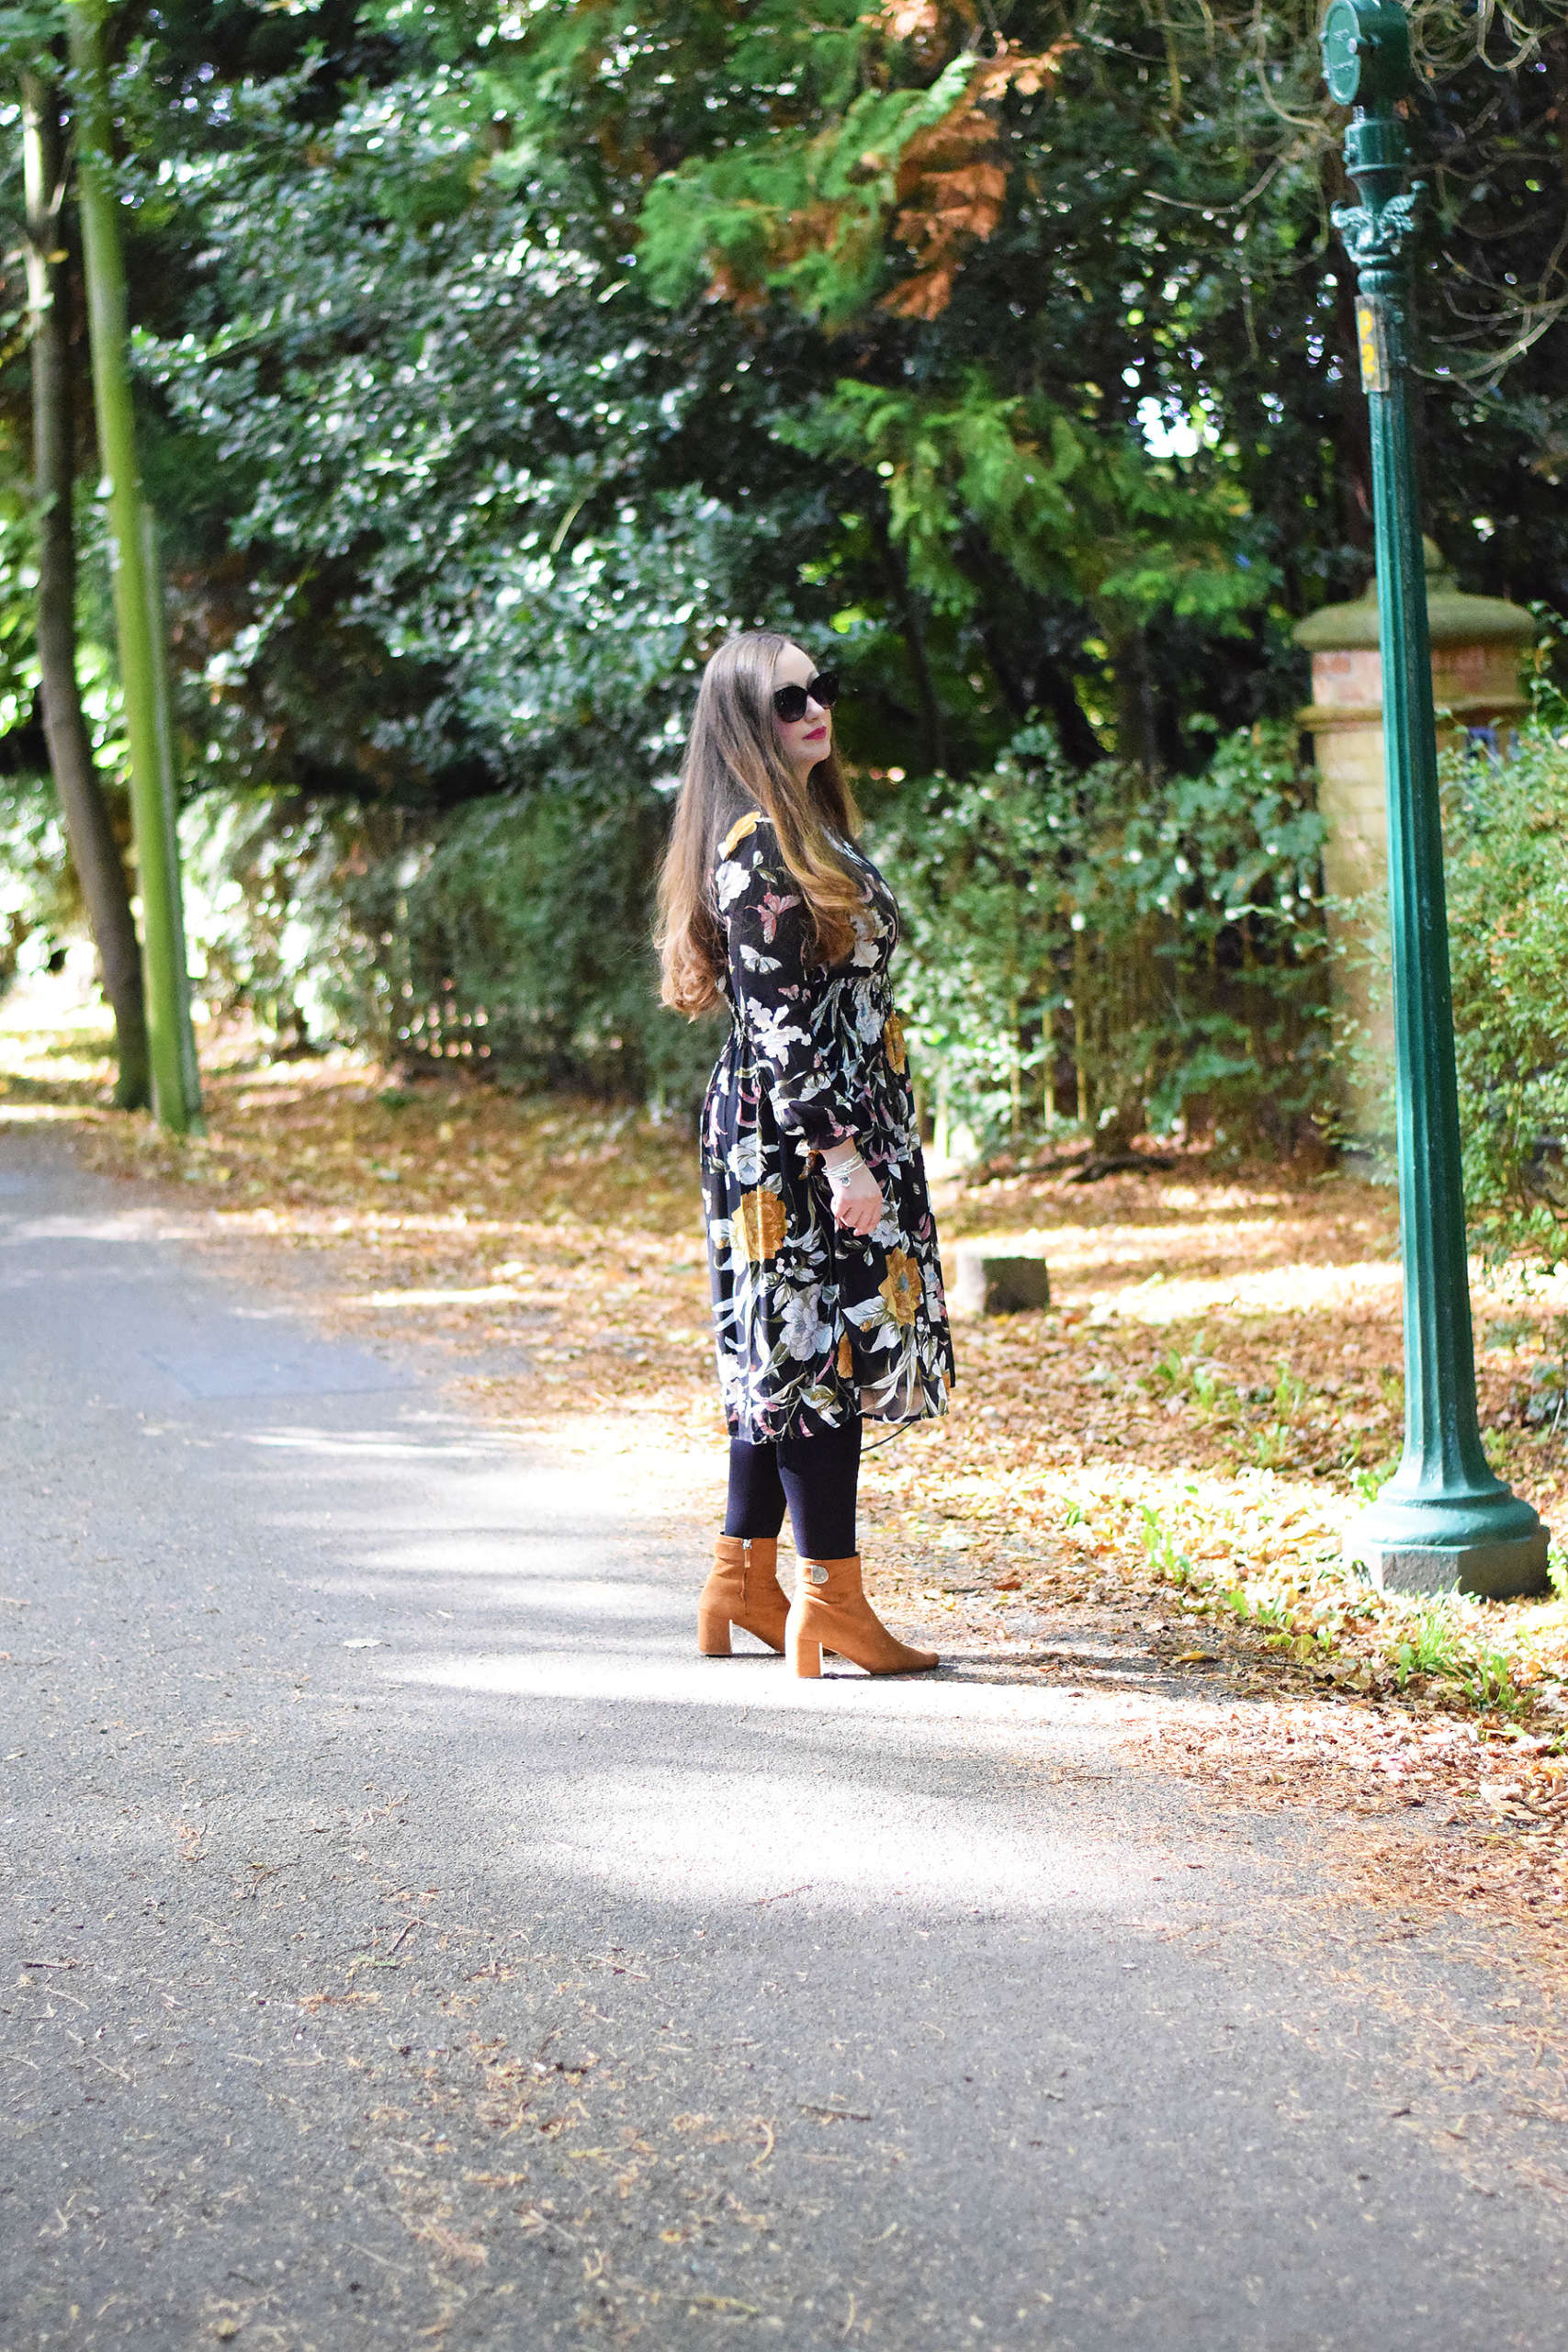 Floral dress outfits for autumn